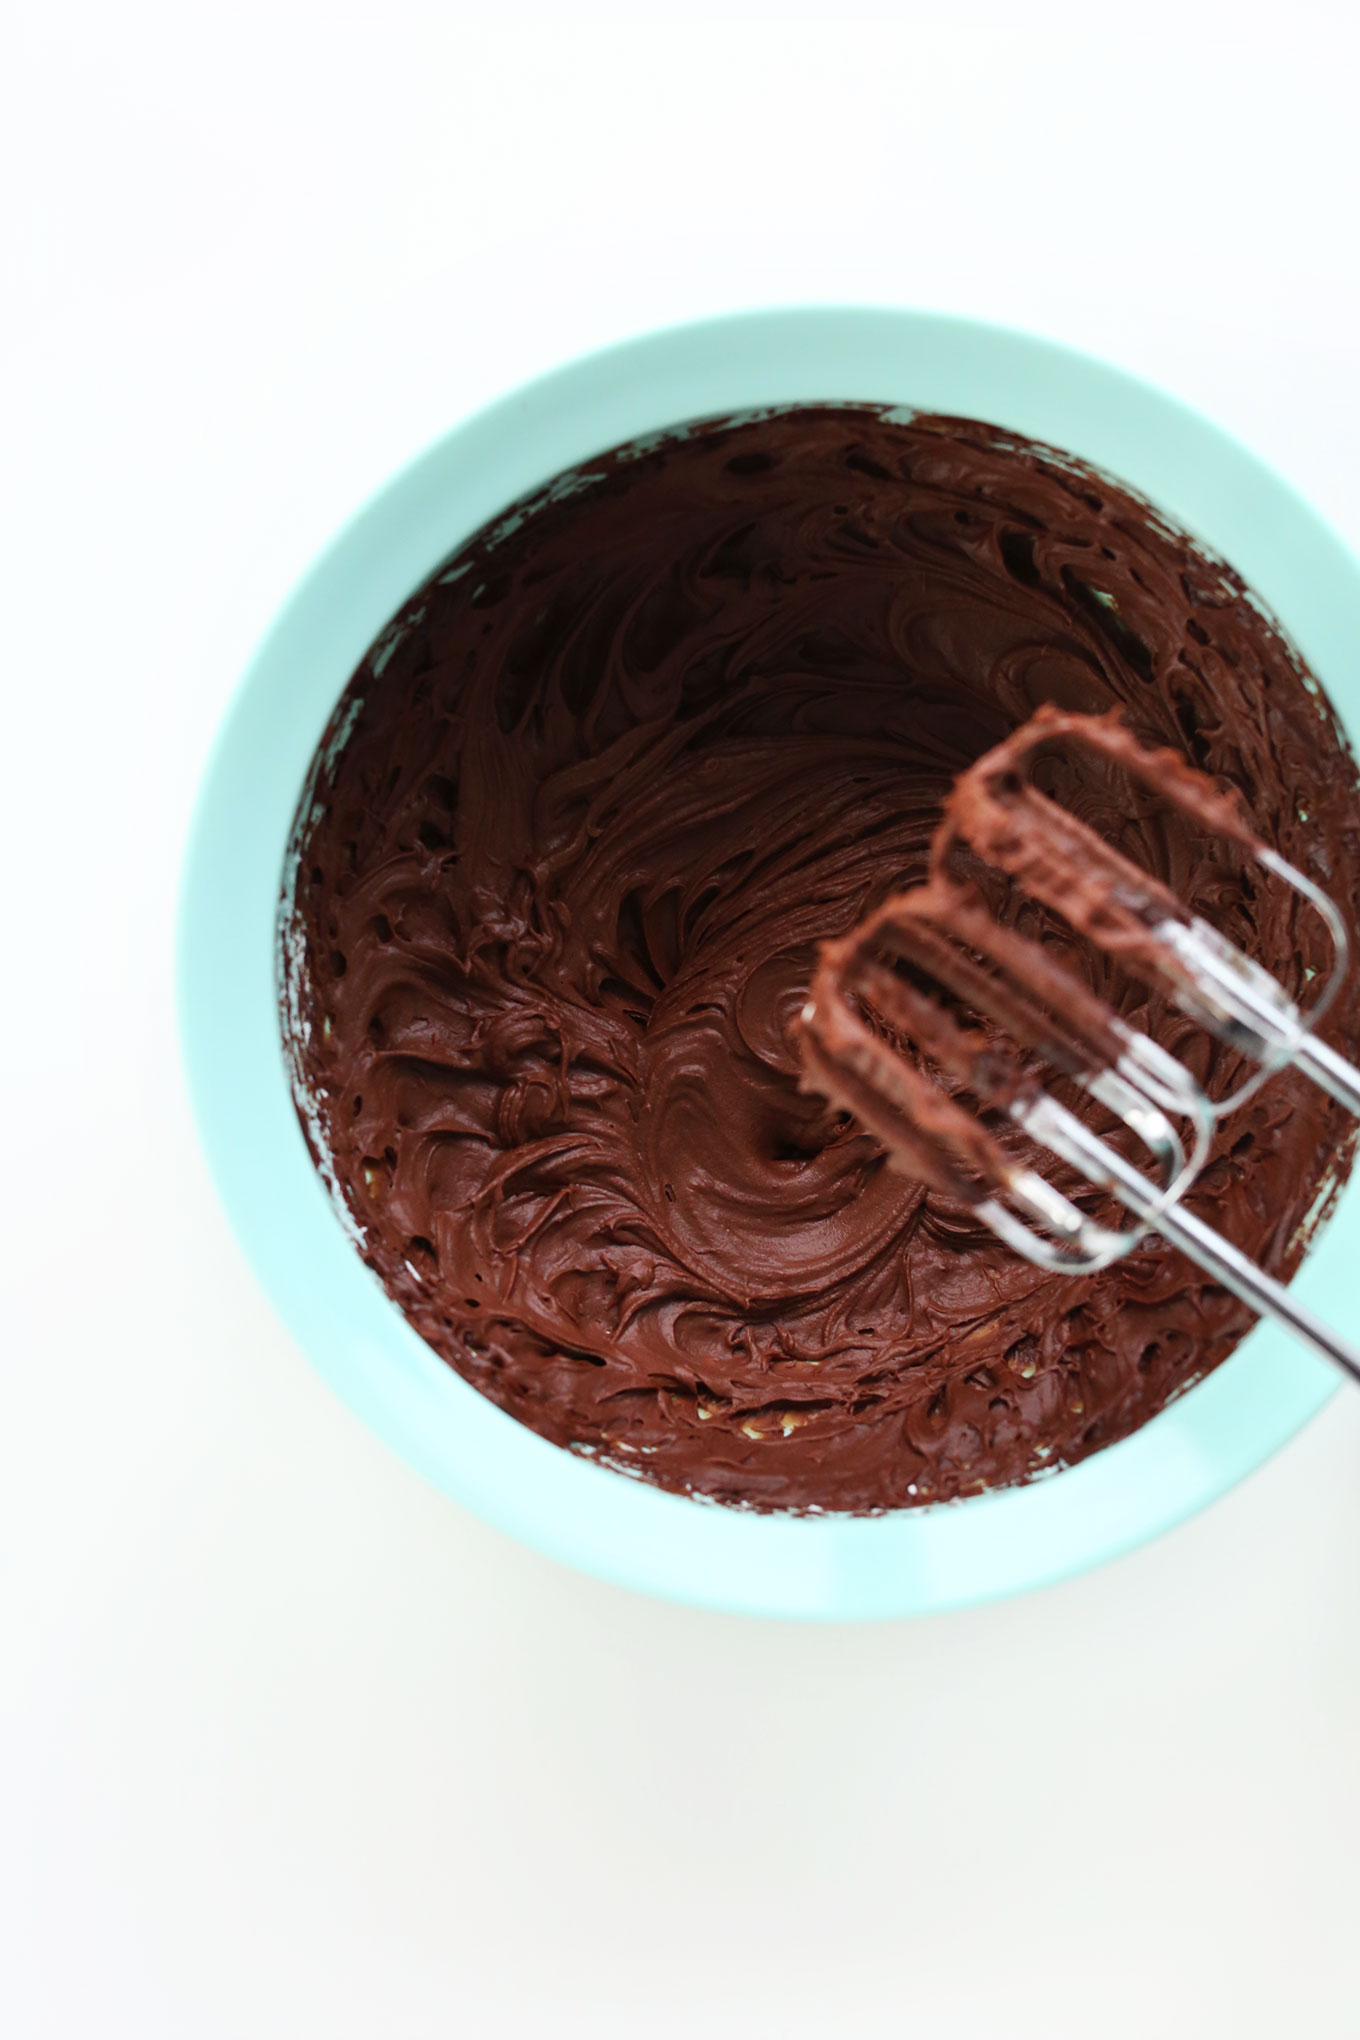 Electric mixer blades resting on top of a bowl of vegan chocolate ganache frosting